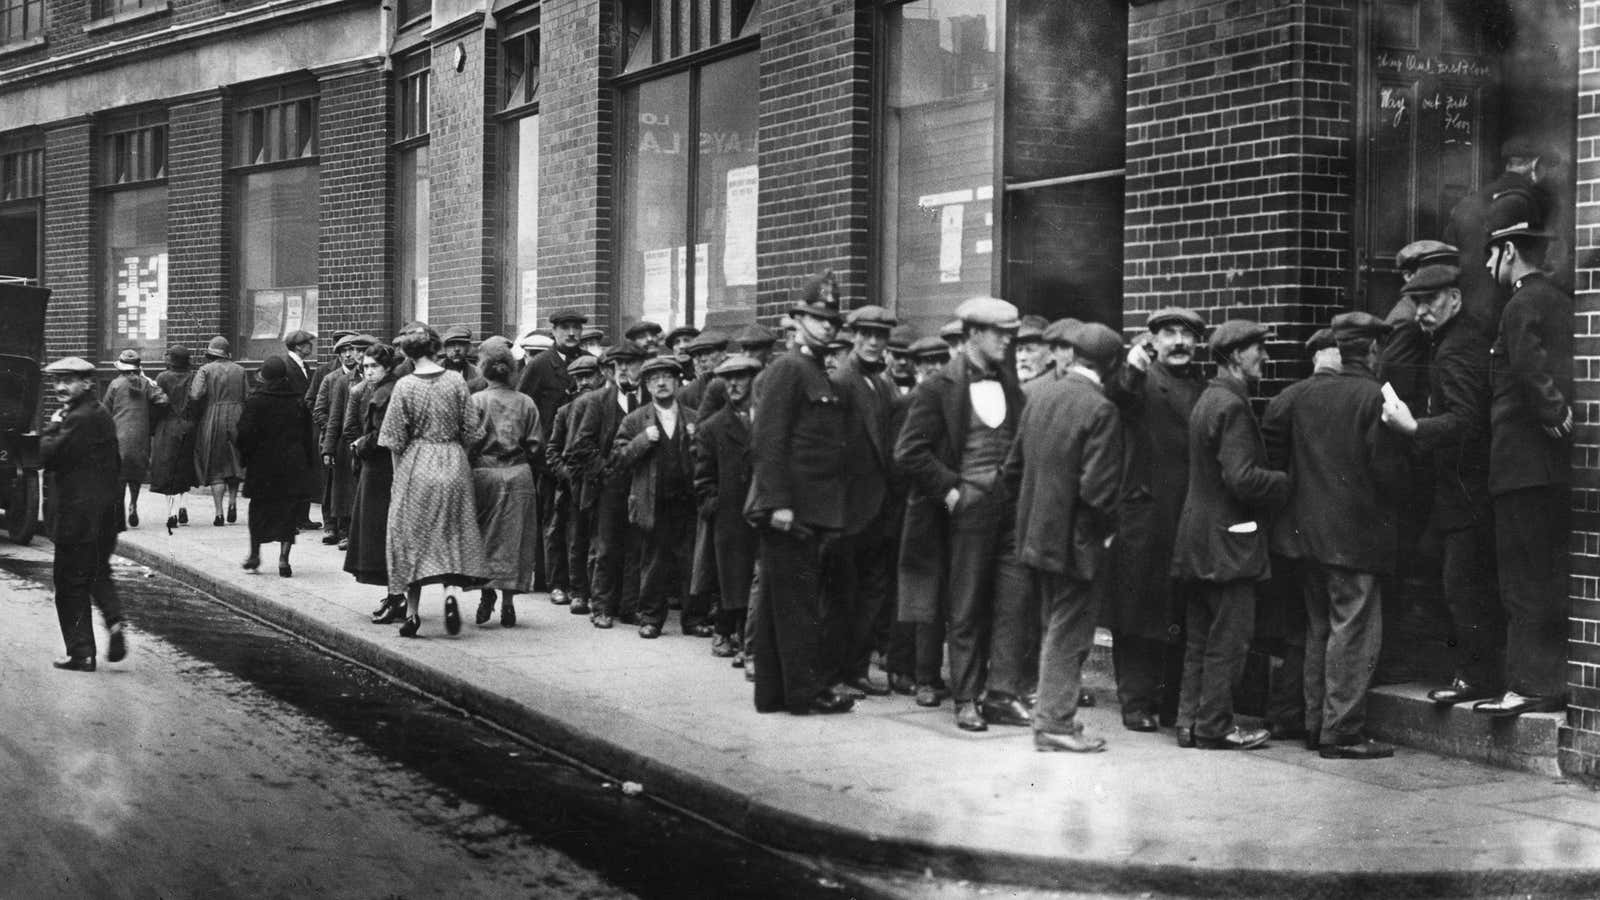 An unemployment line in 1924 England